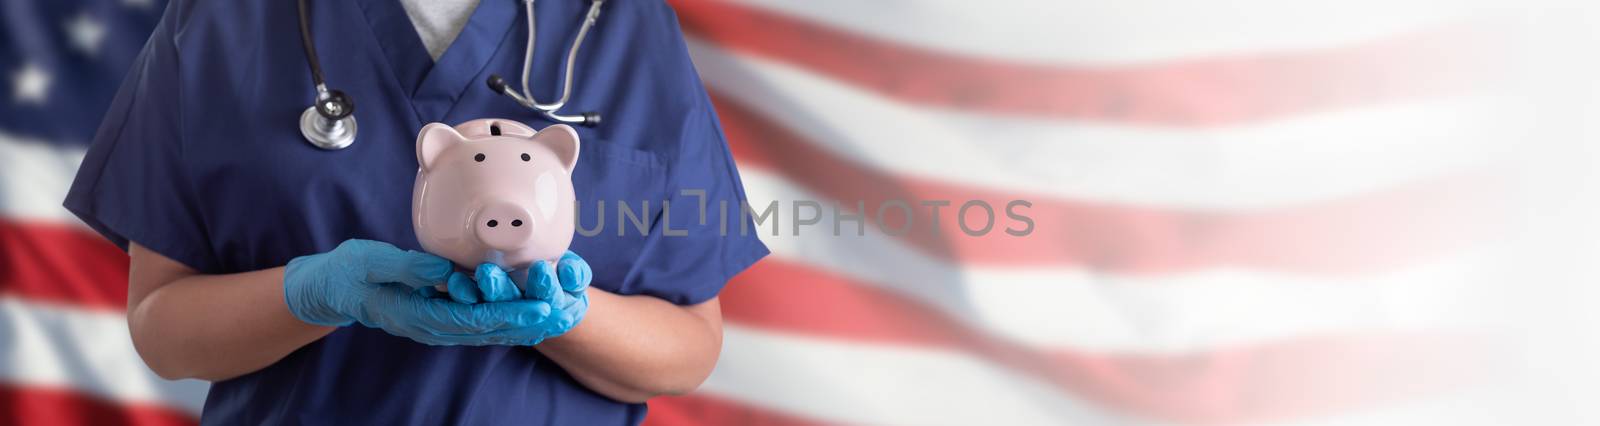 Doctor or Nurse Wearing Surgical Gloves Holding Piggy Bank Over  by Feverpitched